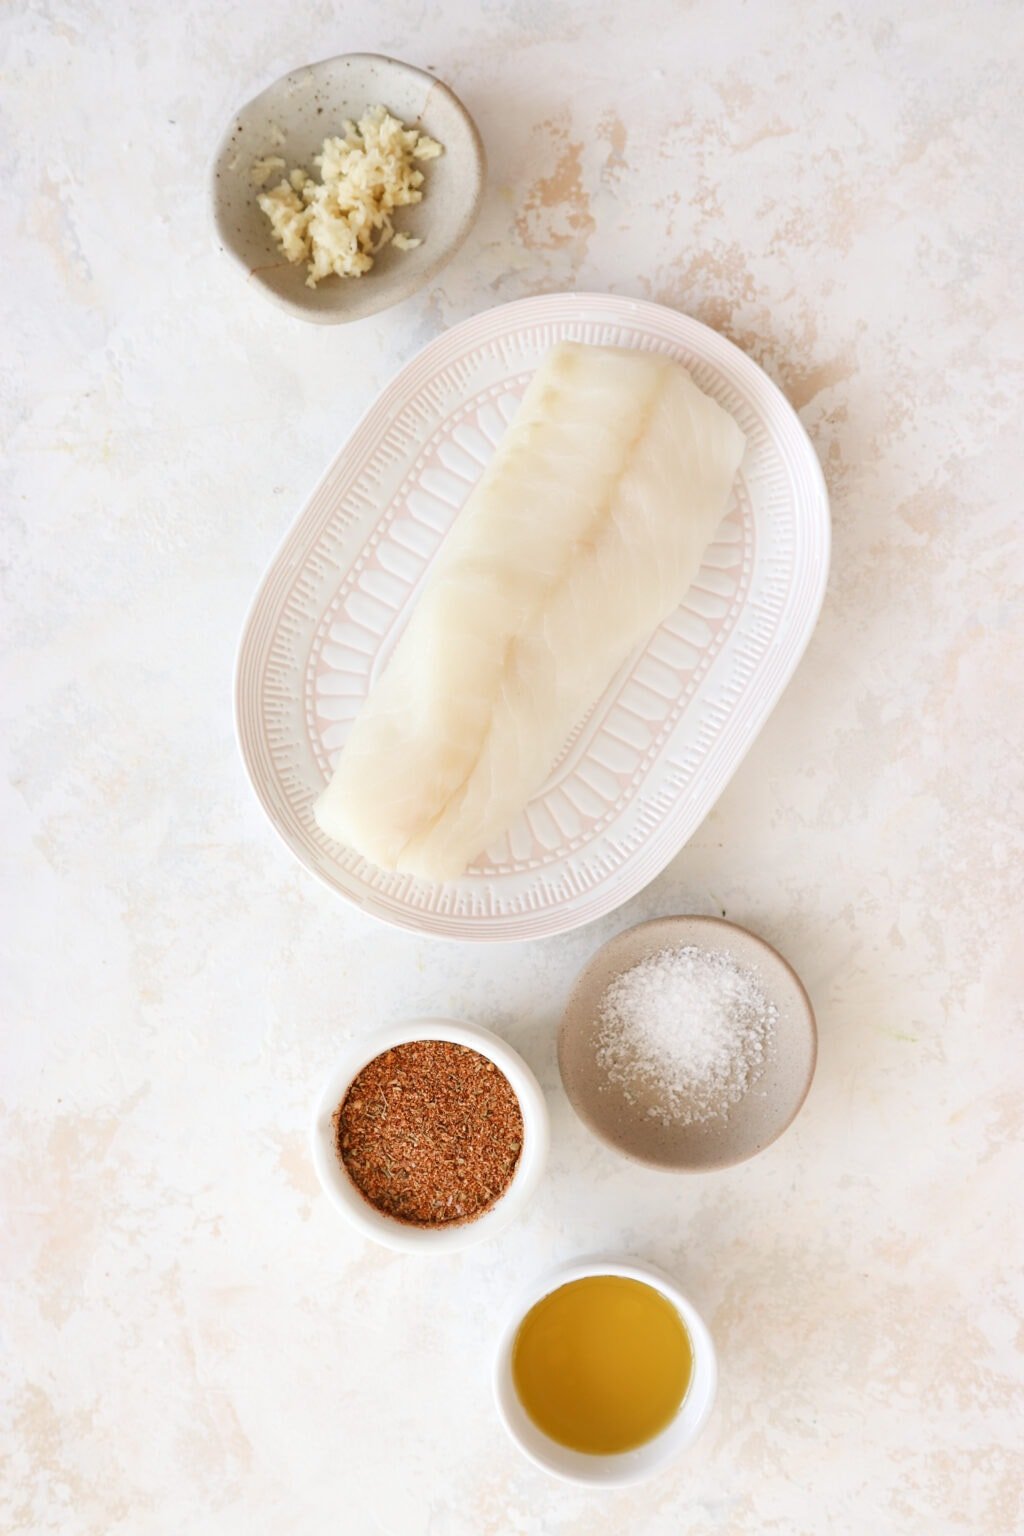 An overhead shot of ingredients on plates. At the top is a small white bowl with minced garlic, in the middle is a pink and white plate with white fish on it, and at the bottom are a grey bowl with salt in it and a white bowl with orangish brown cajun seasoning. 